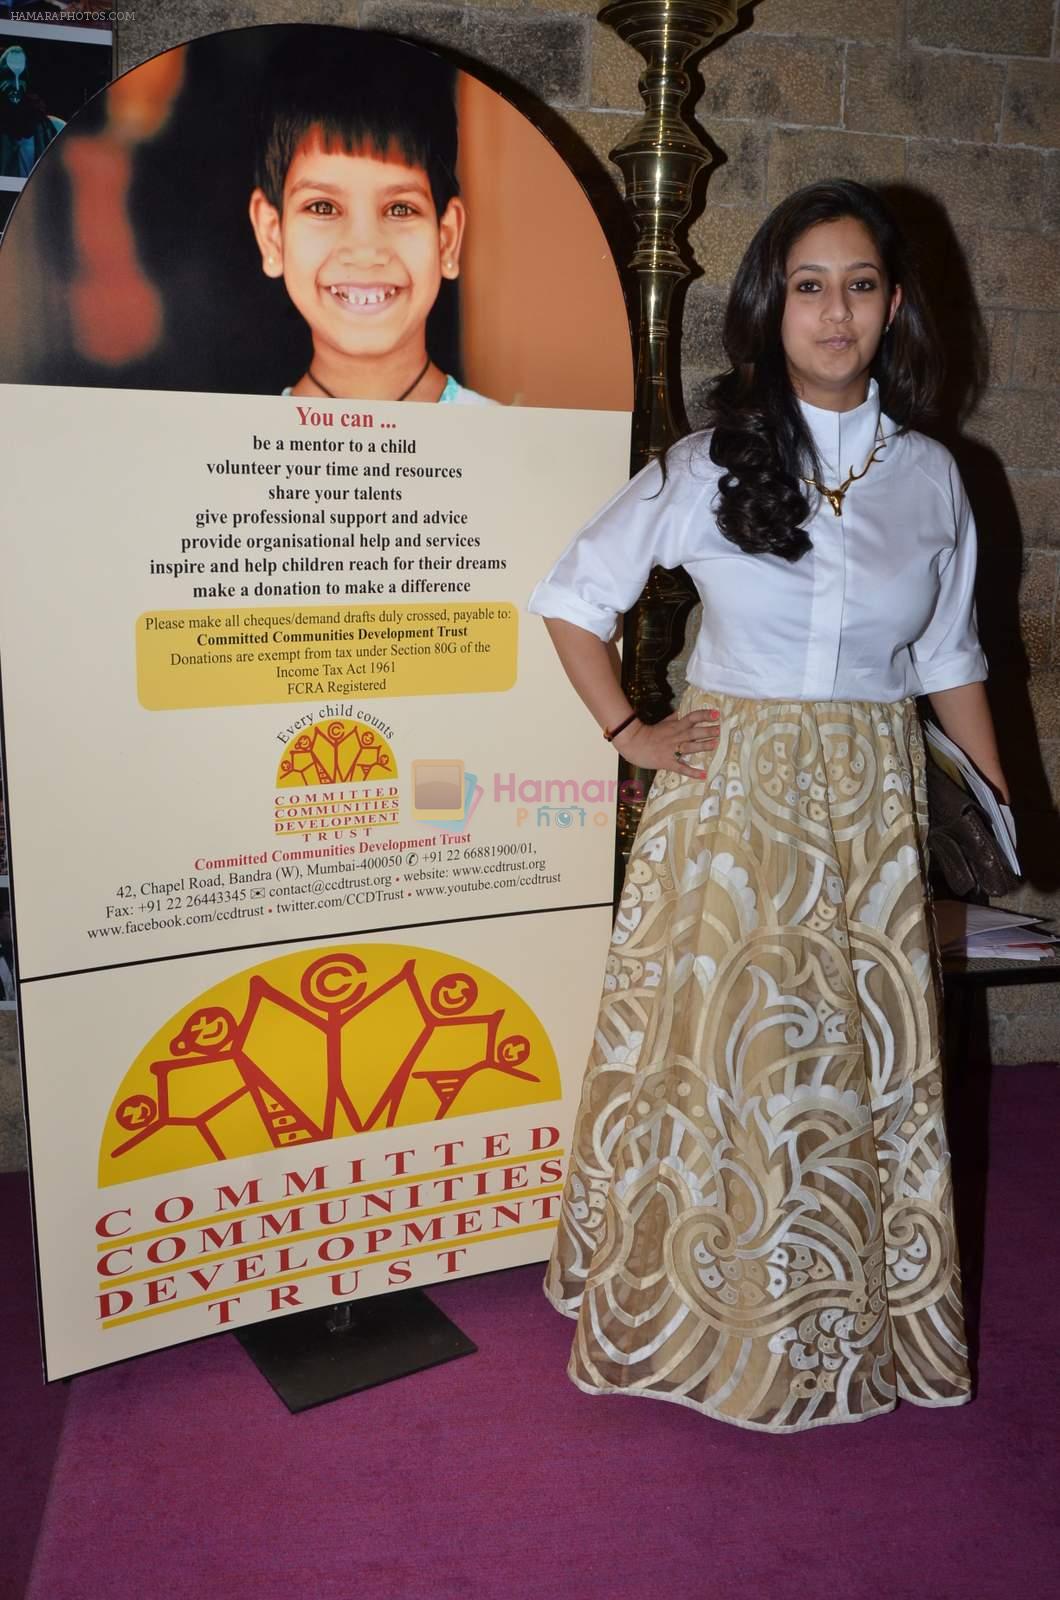 at ccdt ngo event on 30th Nov 2015